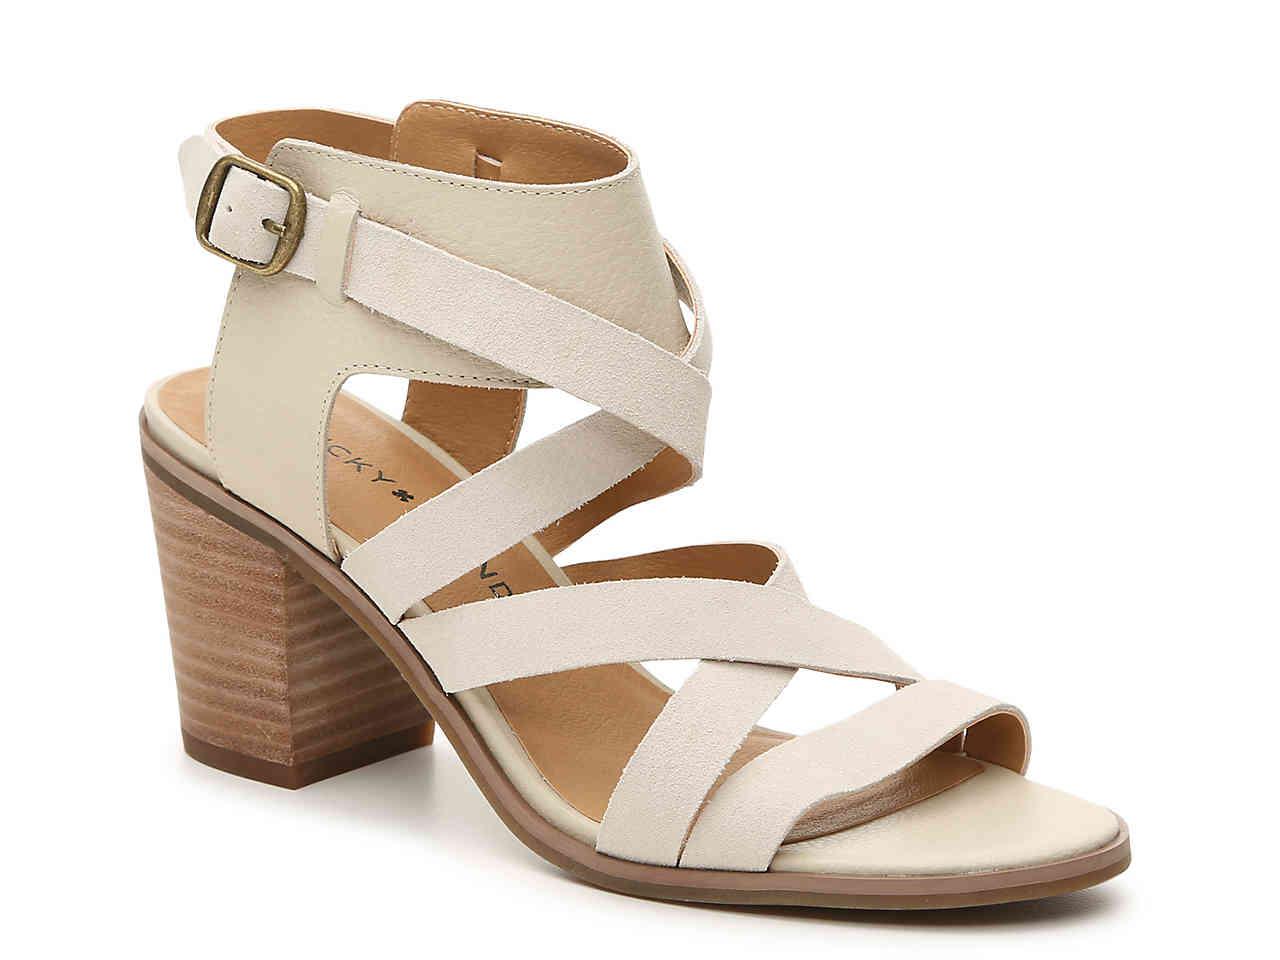 Lucky Brand Kailasa Sandal in Beige (Natural) - Lyst